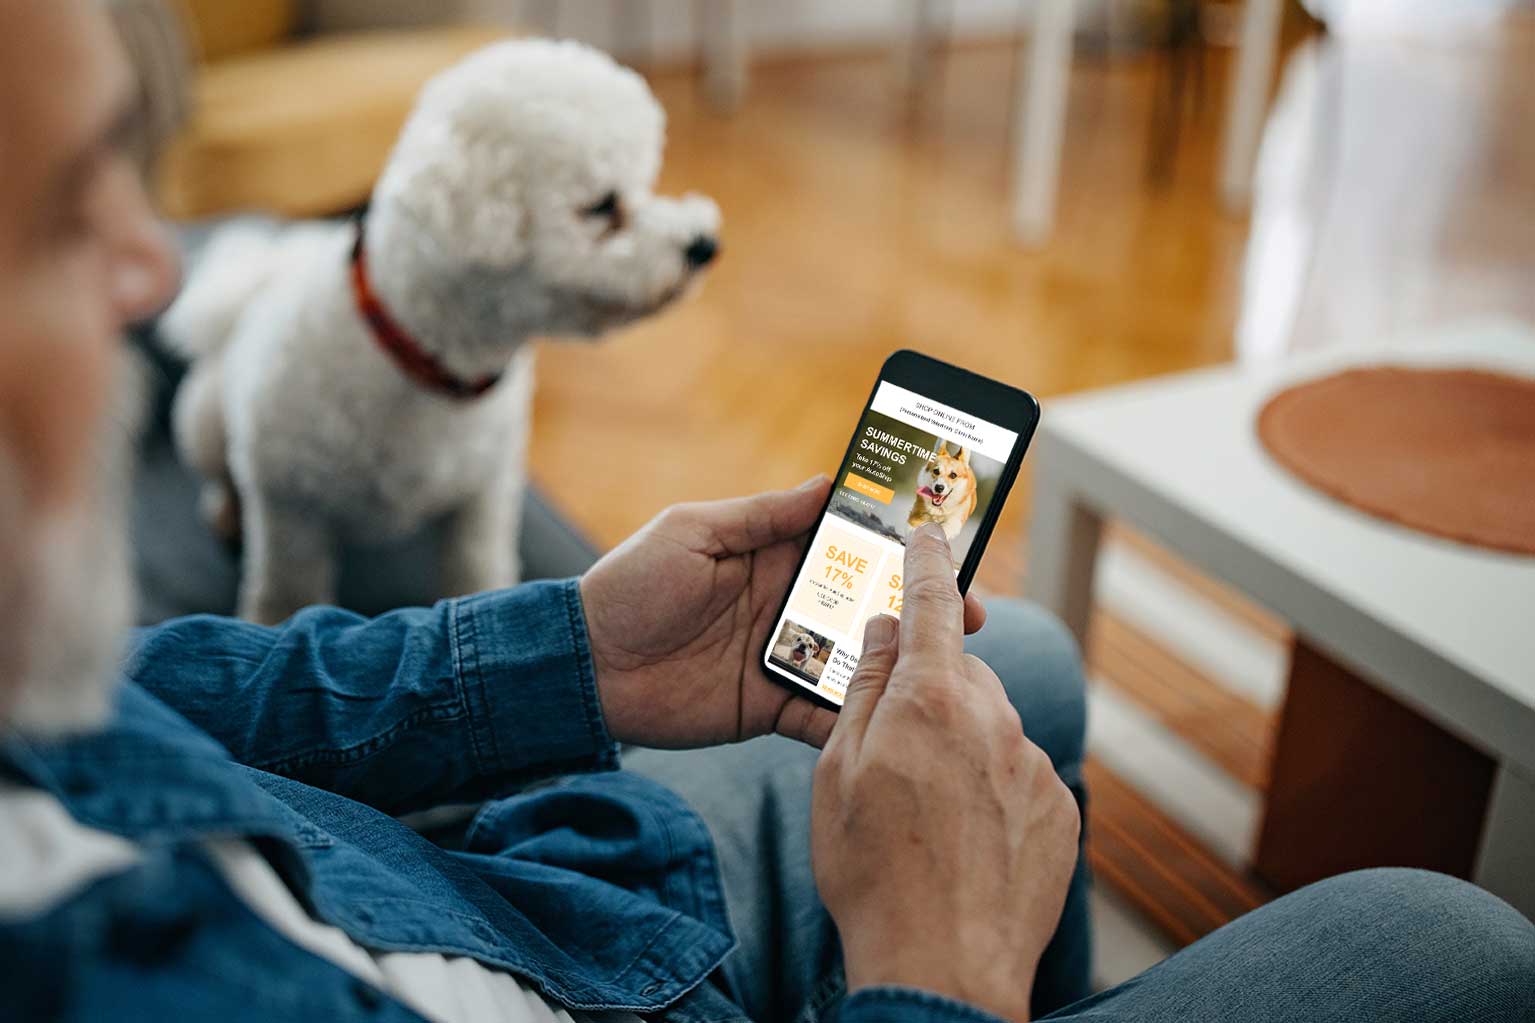 pet owner looking at a PetMail email on their mobile phone, with a white poodle-type dog in the background